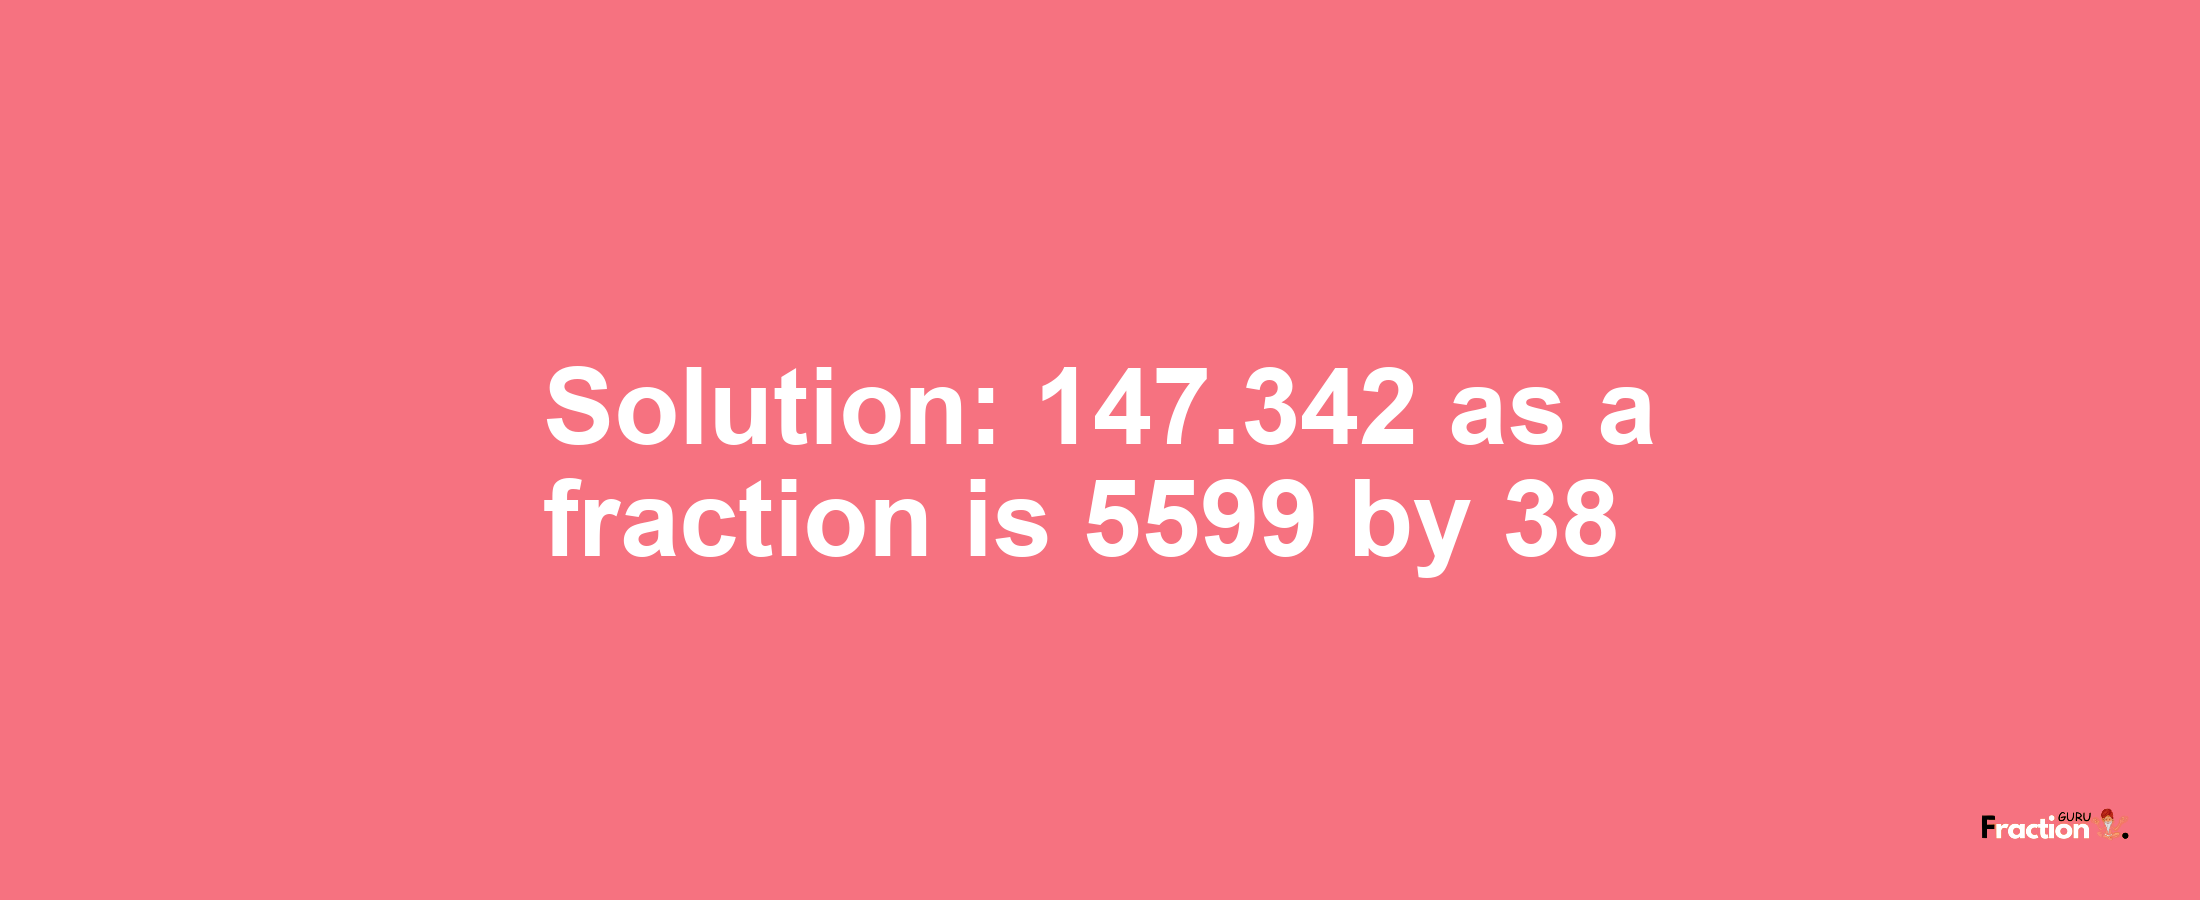 Solution:147.342 as a fraction is 5599/38